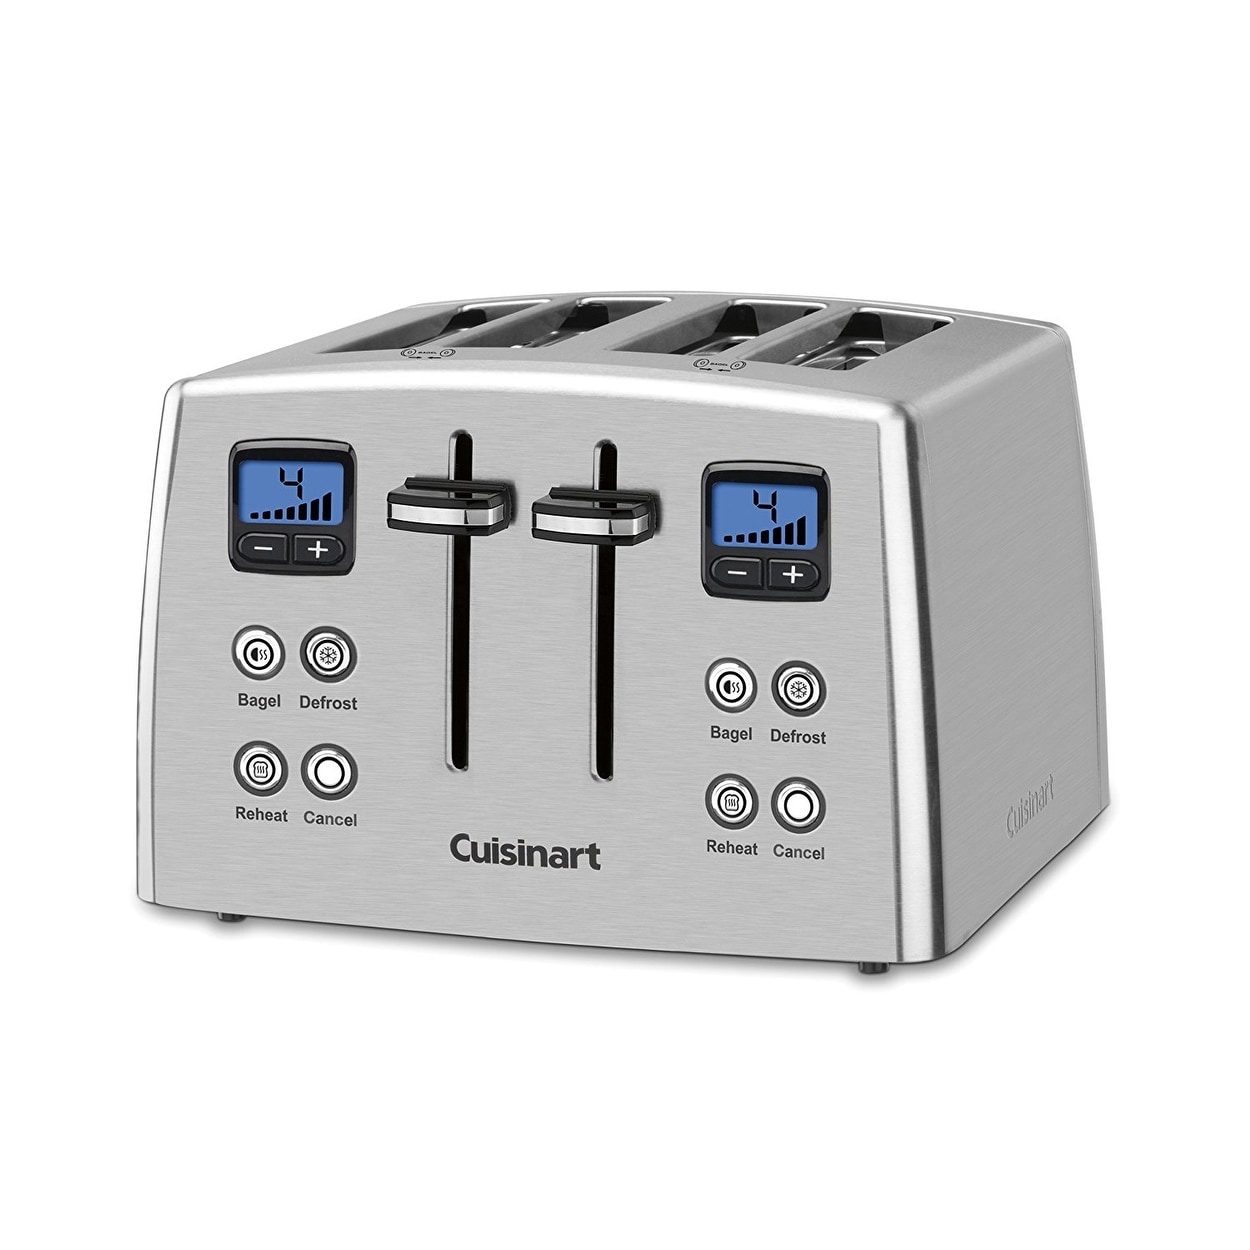 https://ak1.ostkcdn.com/images/products/is/images/direct/b5d3136365f2ed6dd078e5120d5f38d15af414d2/Cuisinart-CPT-435-Countdown-4-Slice-Toaster%2C-Stainless-Steel.jpg